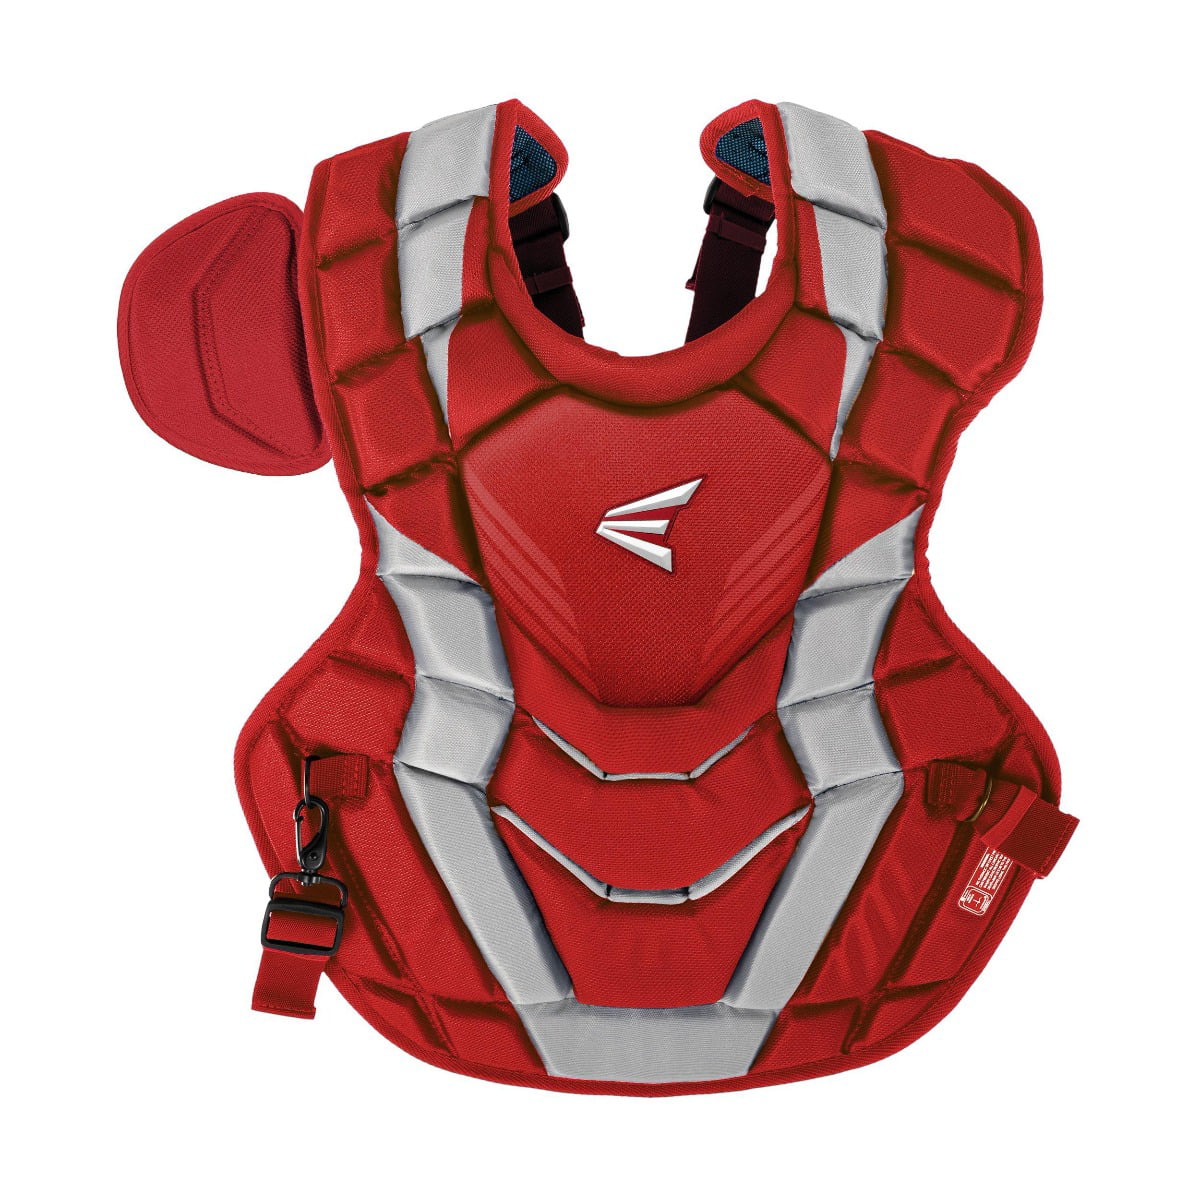 4 Point Strap System for Superior Fit plus Comfort 2021 EASTON ELITE X Baseball Catchers Chest Protector NOCSAE Commotio Cordis Foam Stacked AB Memory Foam For Rebound Control and EVAIR Foam 